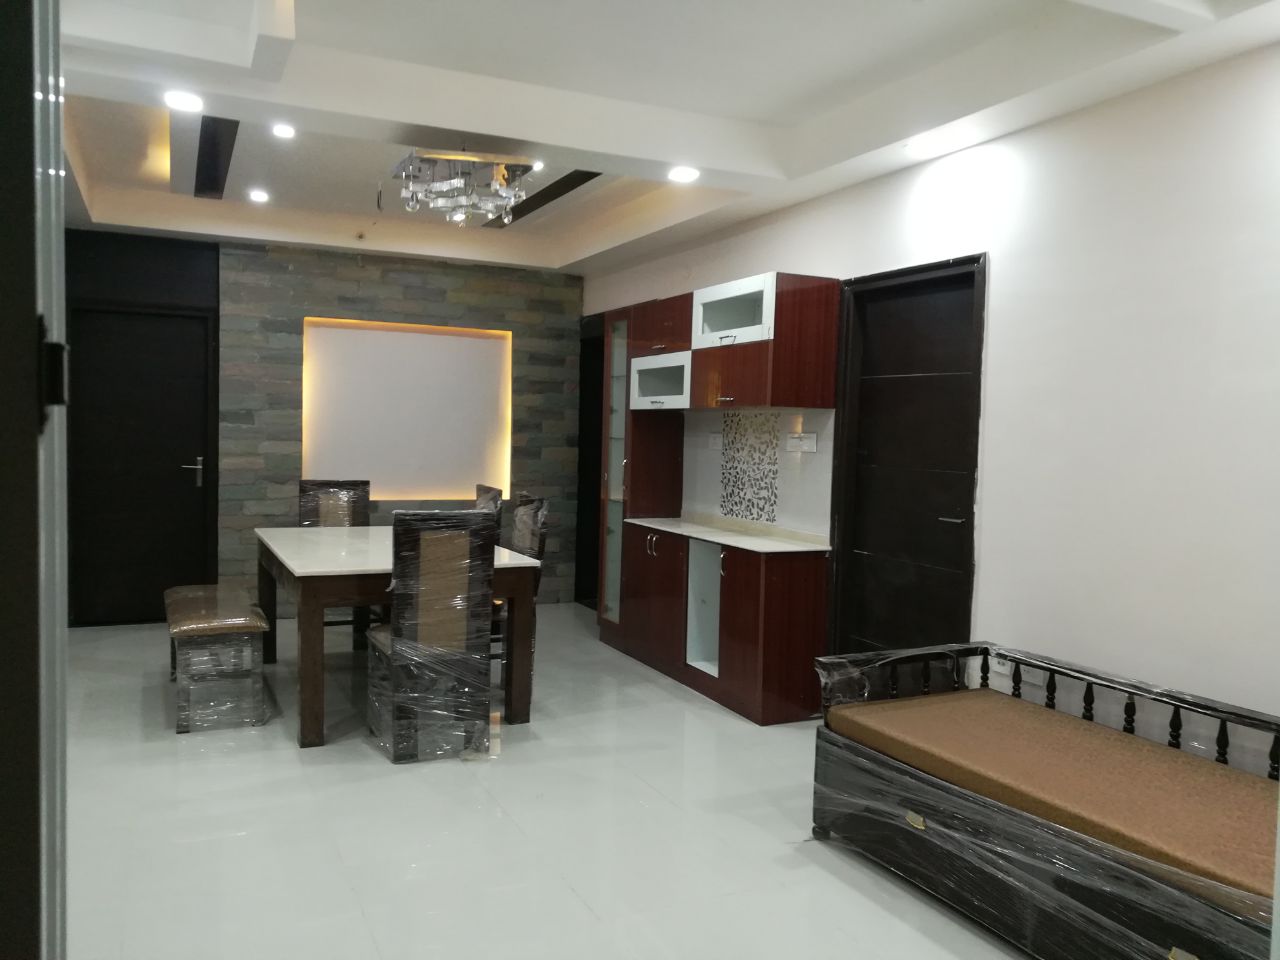 WOOD WORKS IN HYDERABAD,  | R7 INTERIORS | WOOD WORKS IN HYDERABAD, WOOD WORKS IN SECUNDERABAD, WOOD WORKS IN GACHIBOWLI, WOOD WORKS IN GOPANPALLY, WOOD WORKS IN KONDAPUR, WOOD WORKS IN MADHAPUR, WOOD WORKS IN MANIKONDA, WOOD WORKS IN JNTU, - GL41083